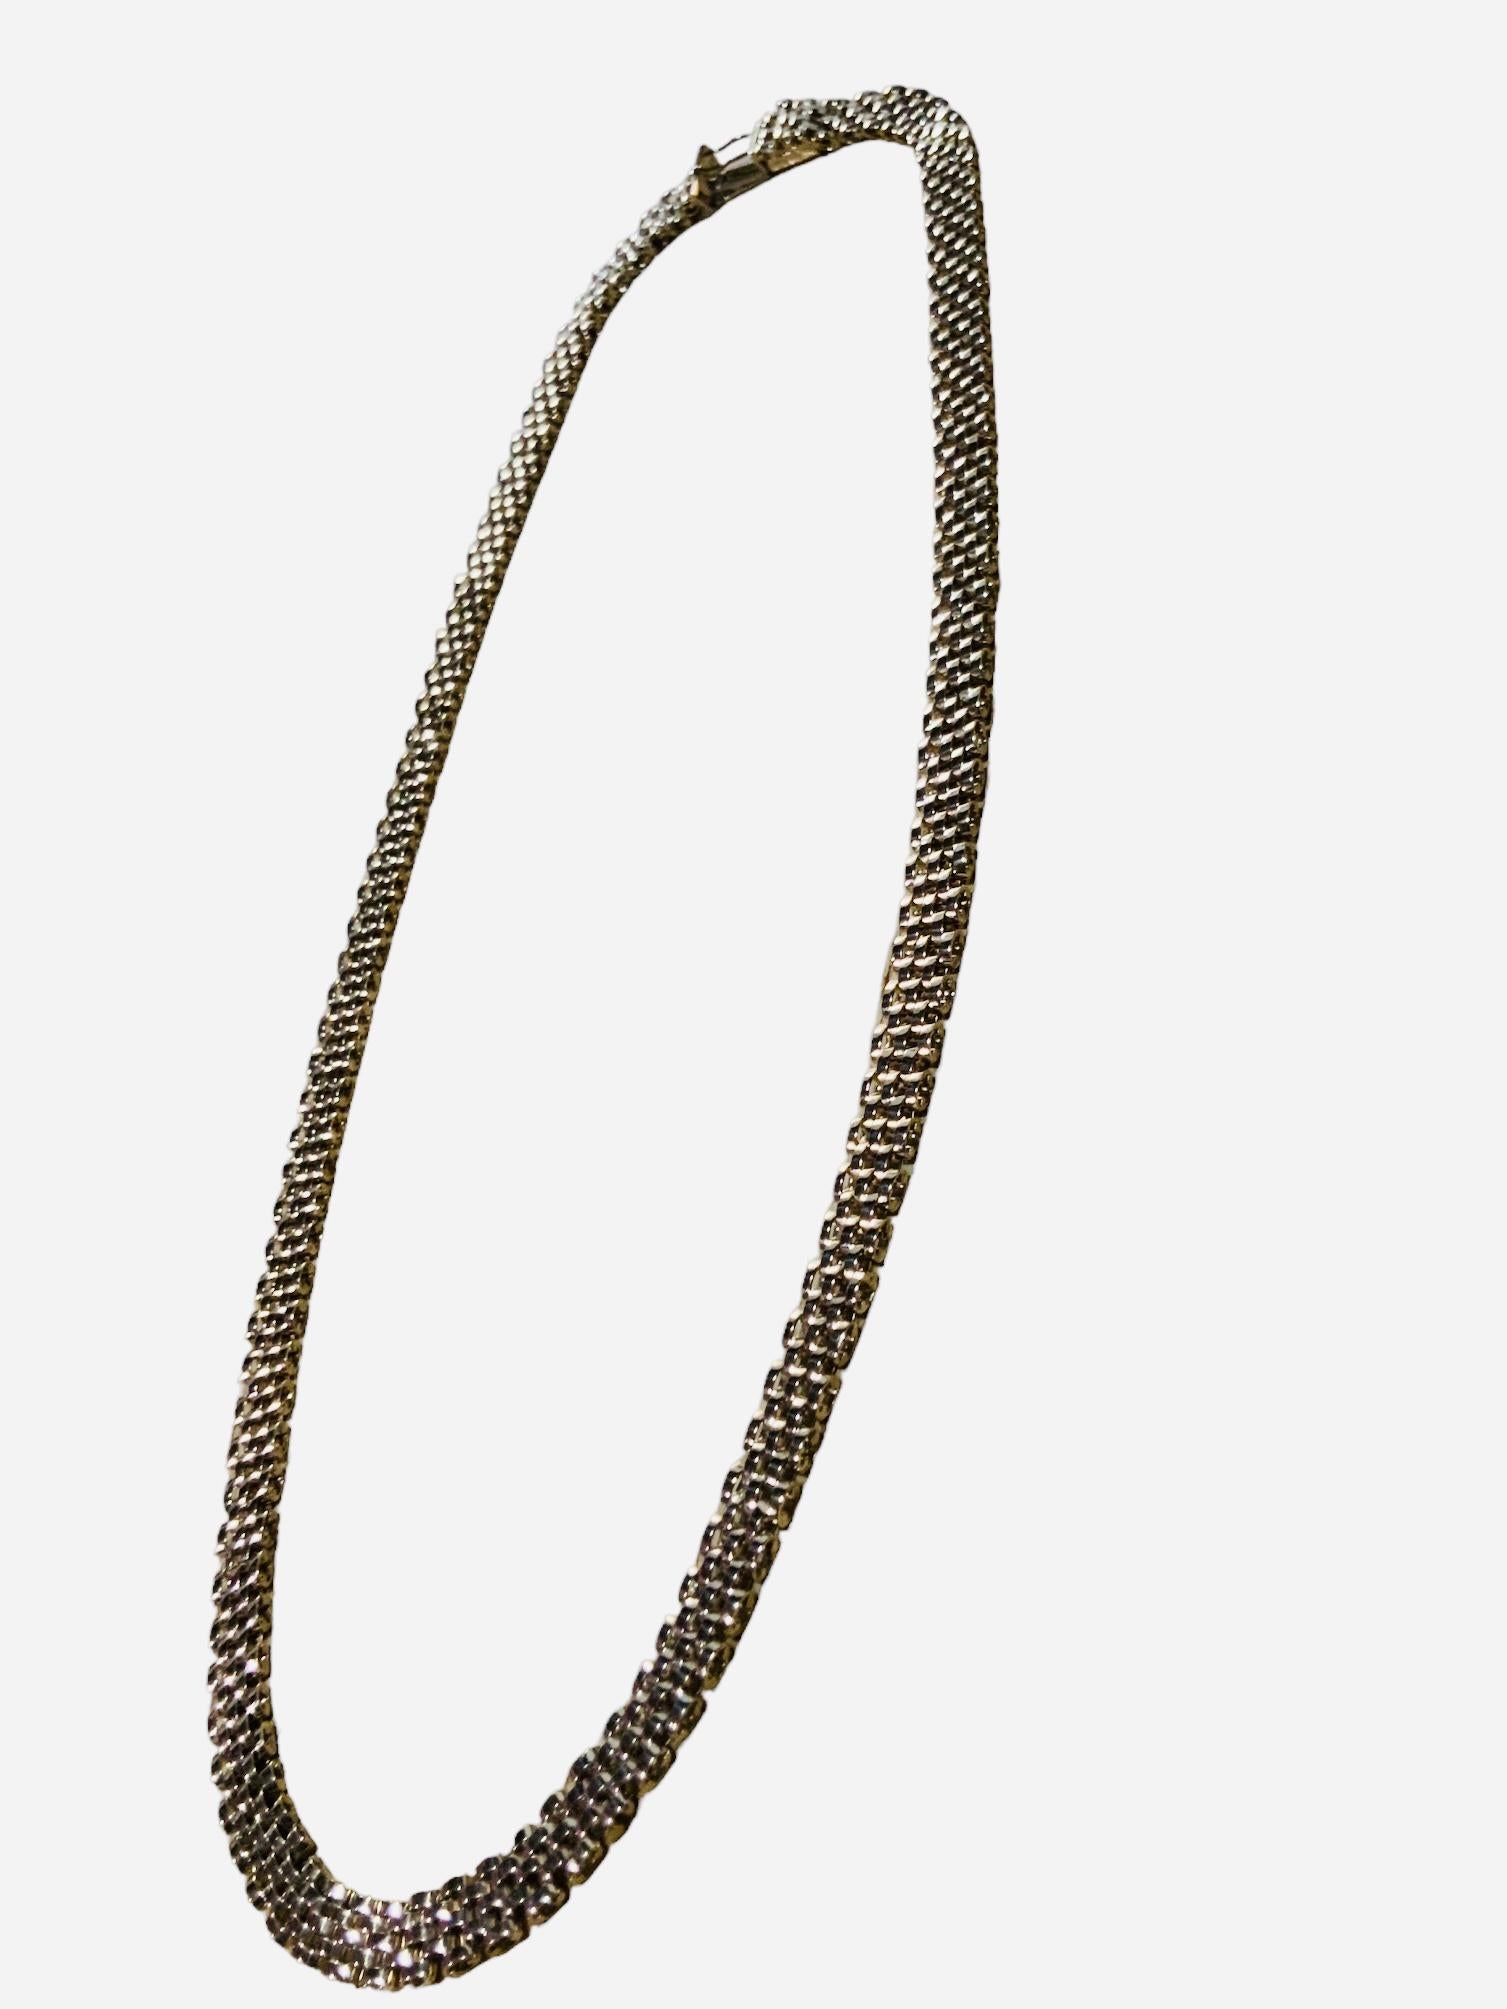 This is a Lady’s panther necklace in 14K yellow gold. Its length is 18 inches and width is 6.33 mm. The necklace contains a hidden box clasp with one eight figure safety. It weighs 26.7grams. It is signed 585, Italy in the clasp box.